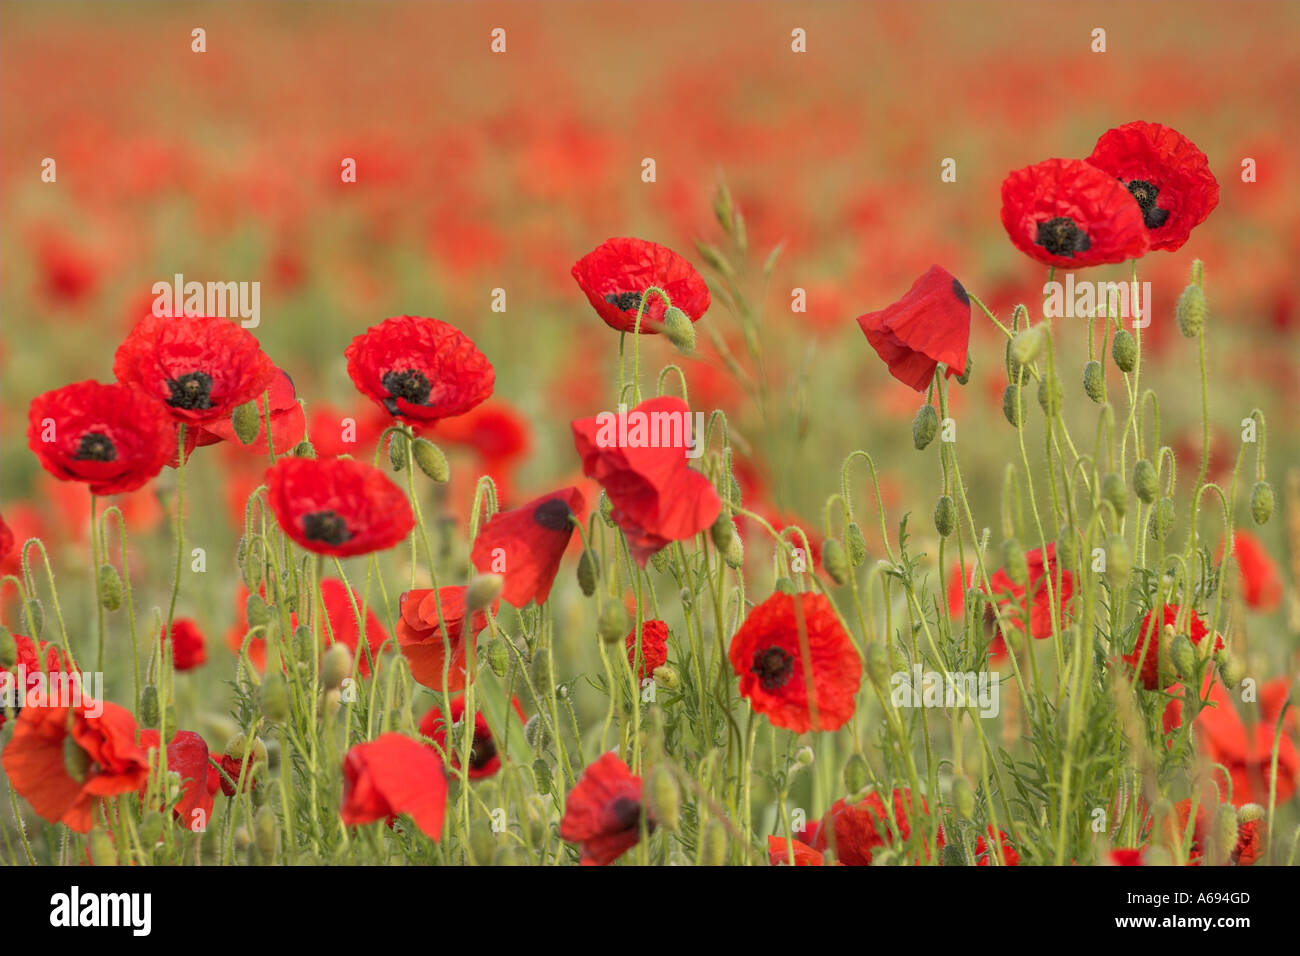 Poppy field [Papaver rhoeas], mass of colourful poppies and red flower petals, England, UK Stock Photo